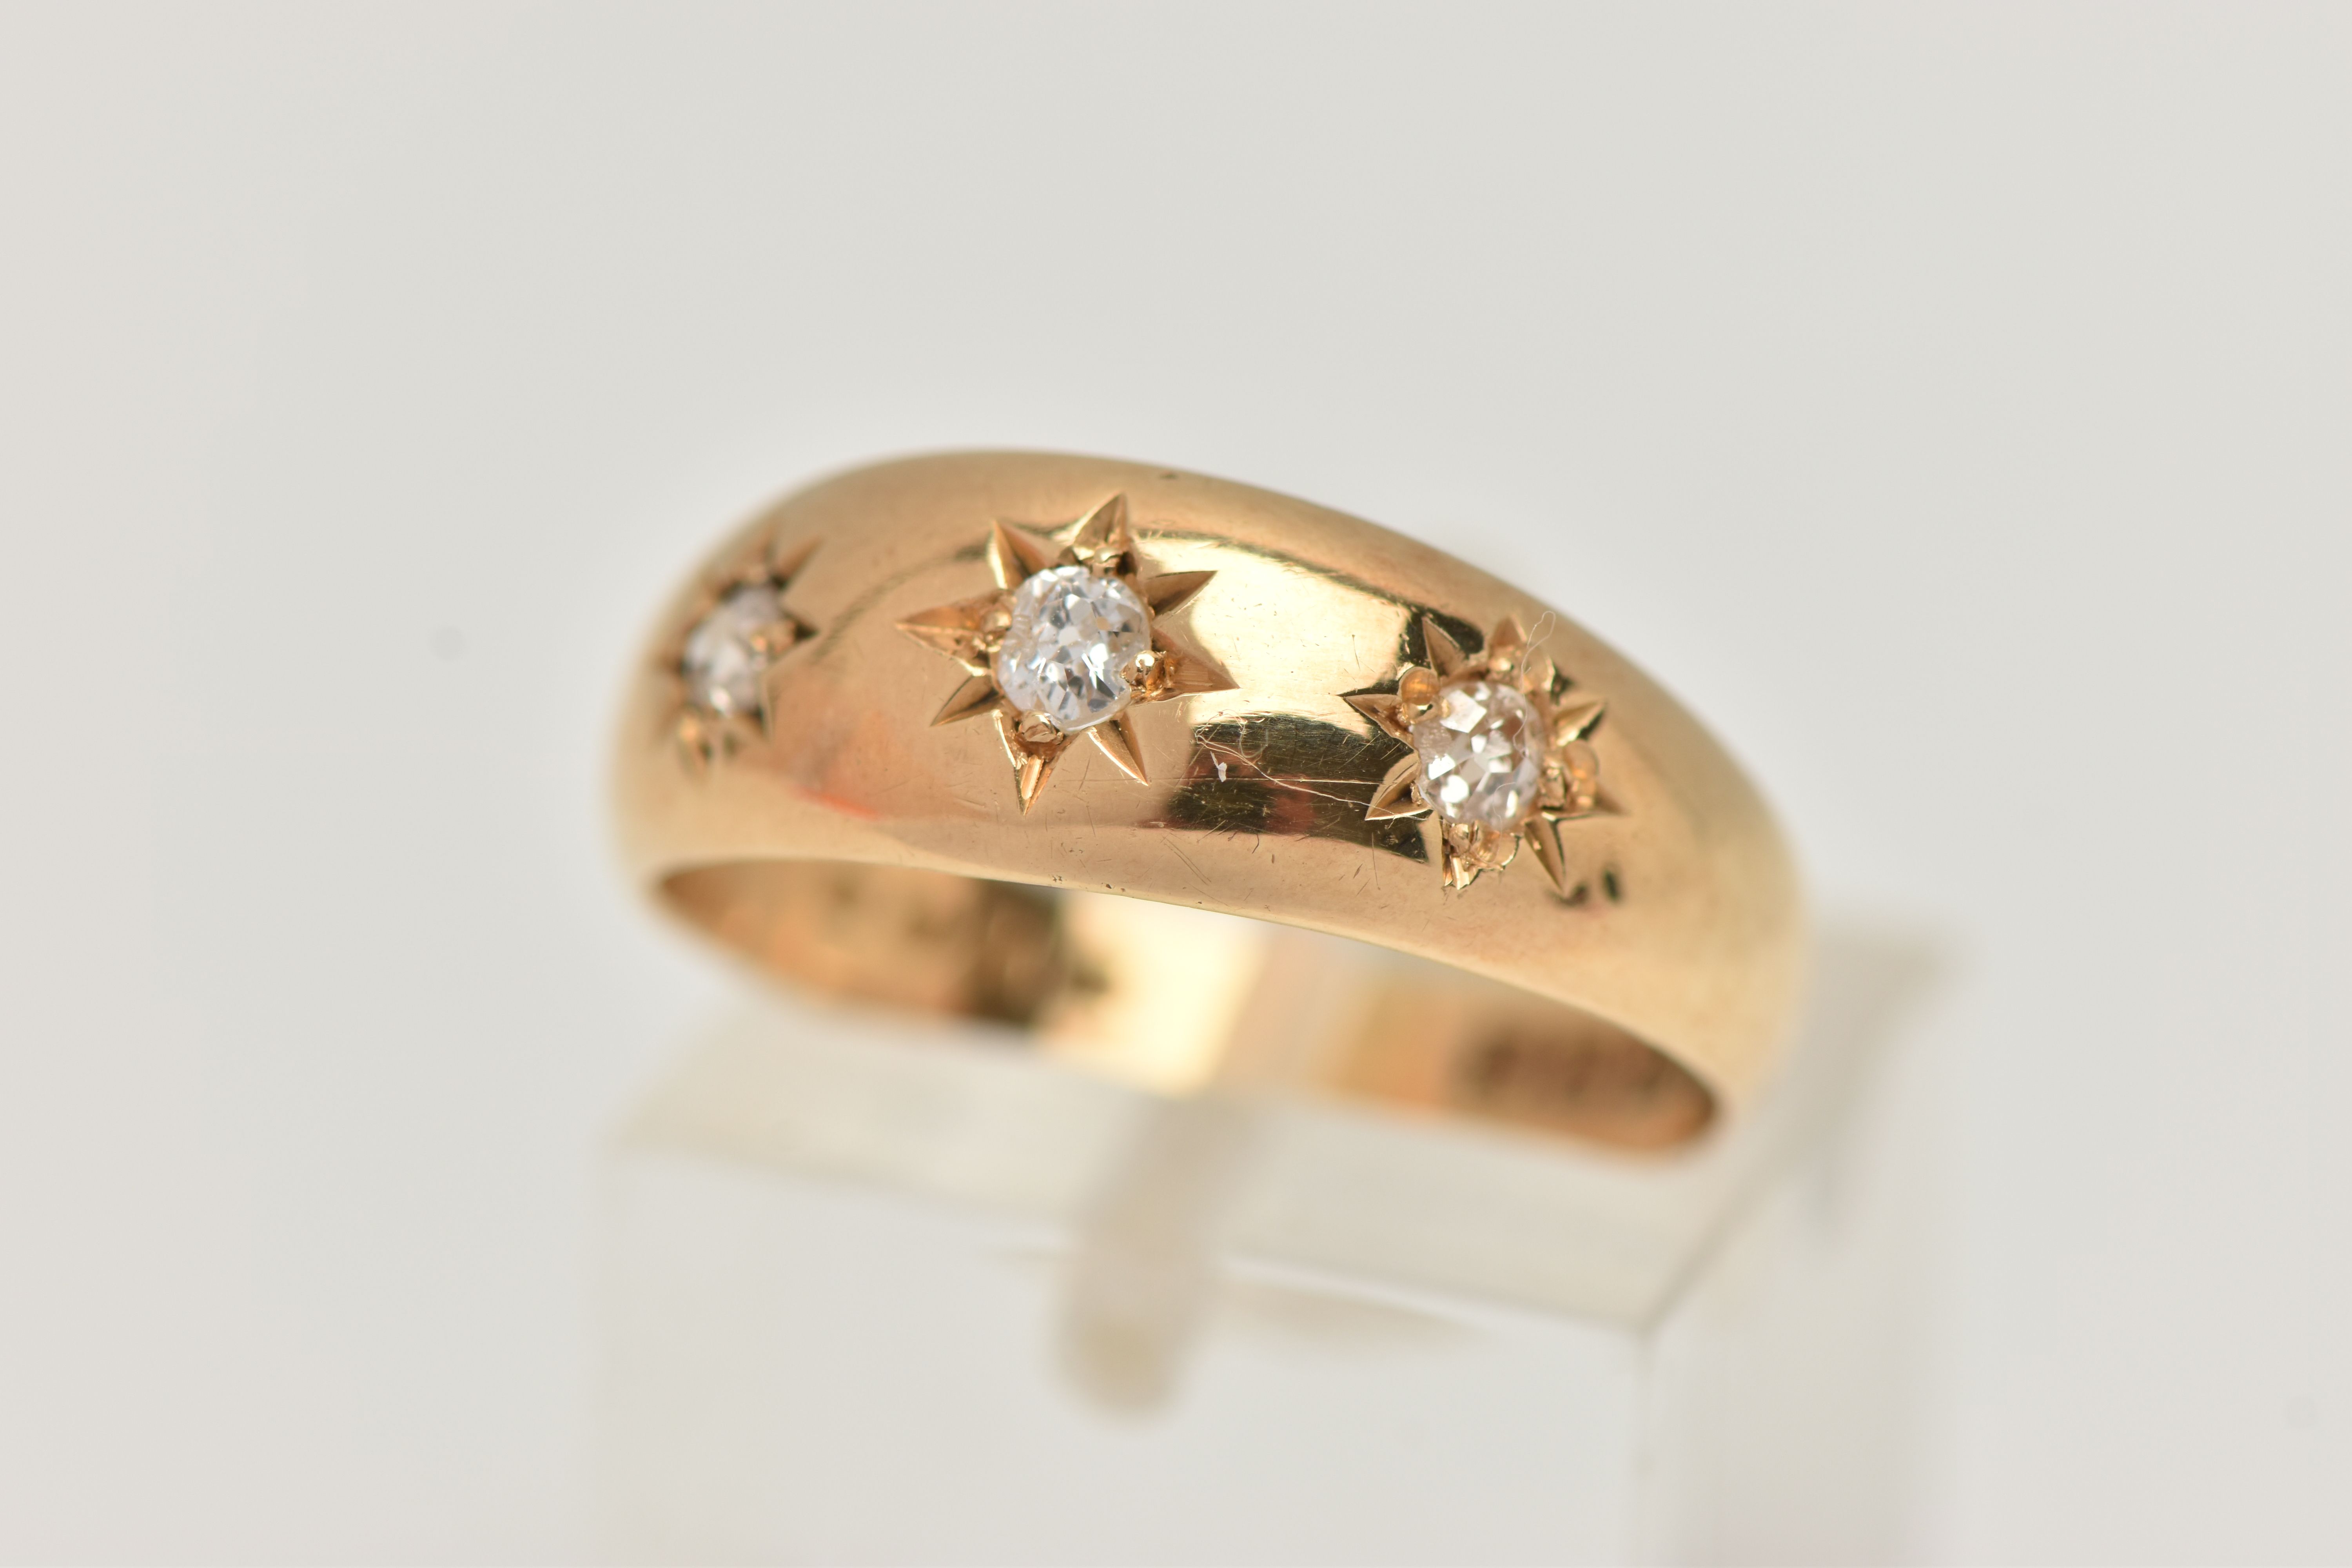 AN EARLY 20TH CENTURY 18CT YELLOW GOLD DIAMOND THREE STONE RING, set with graduating old European